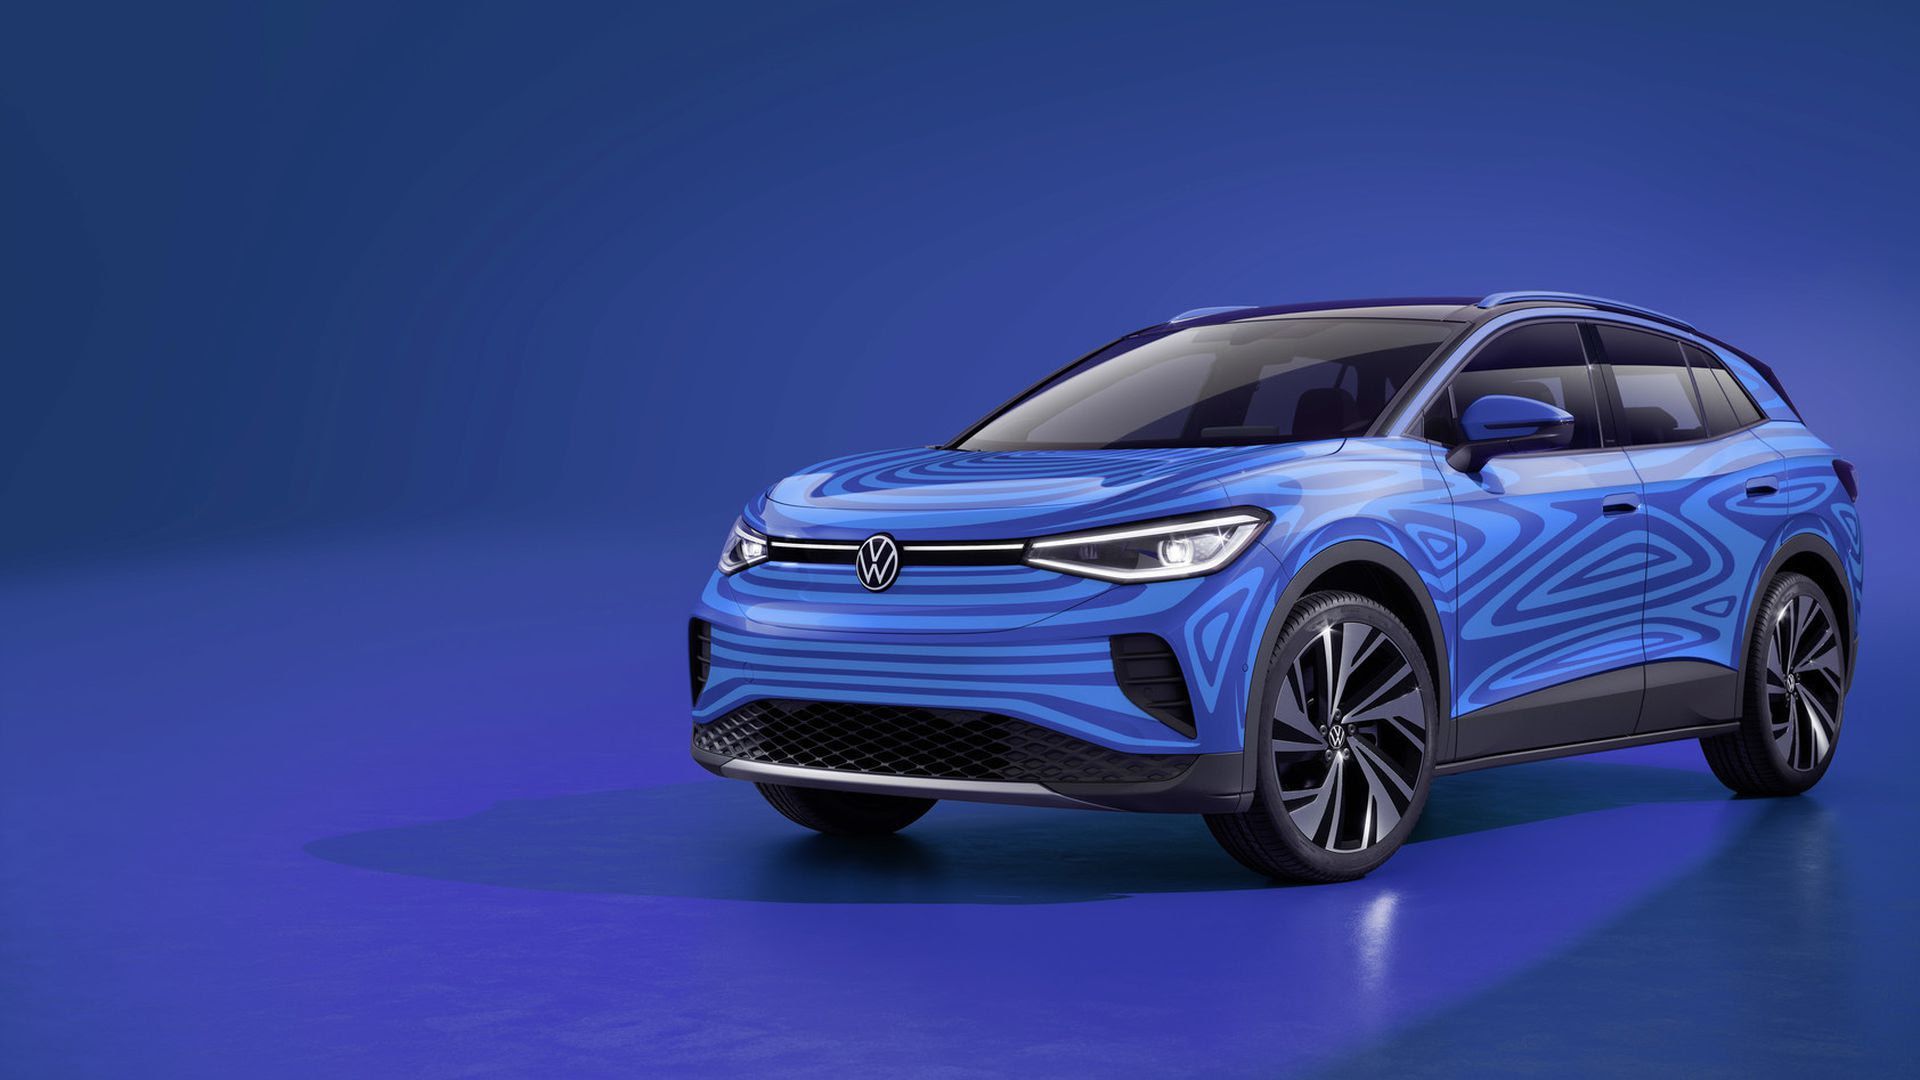 The electric SUV Volkswagen.